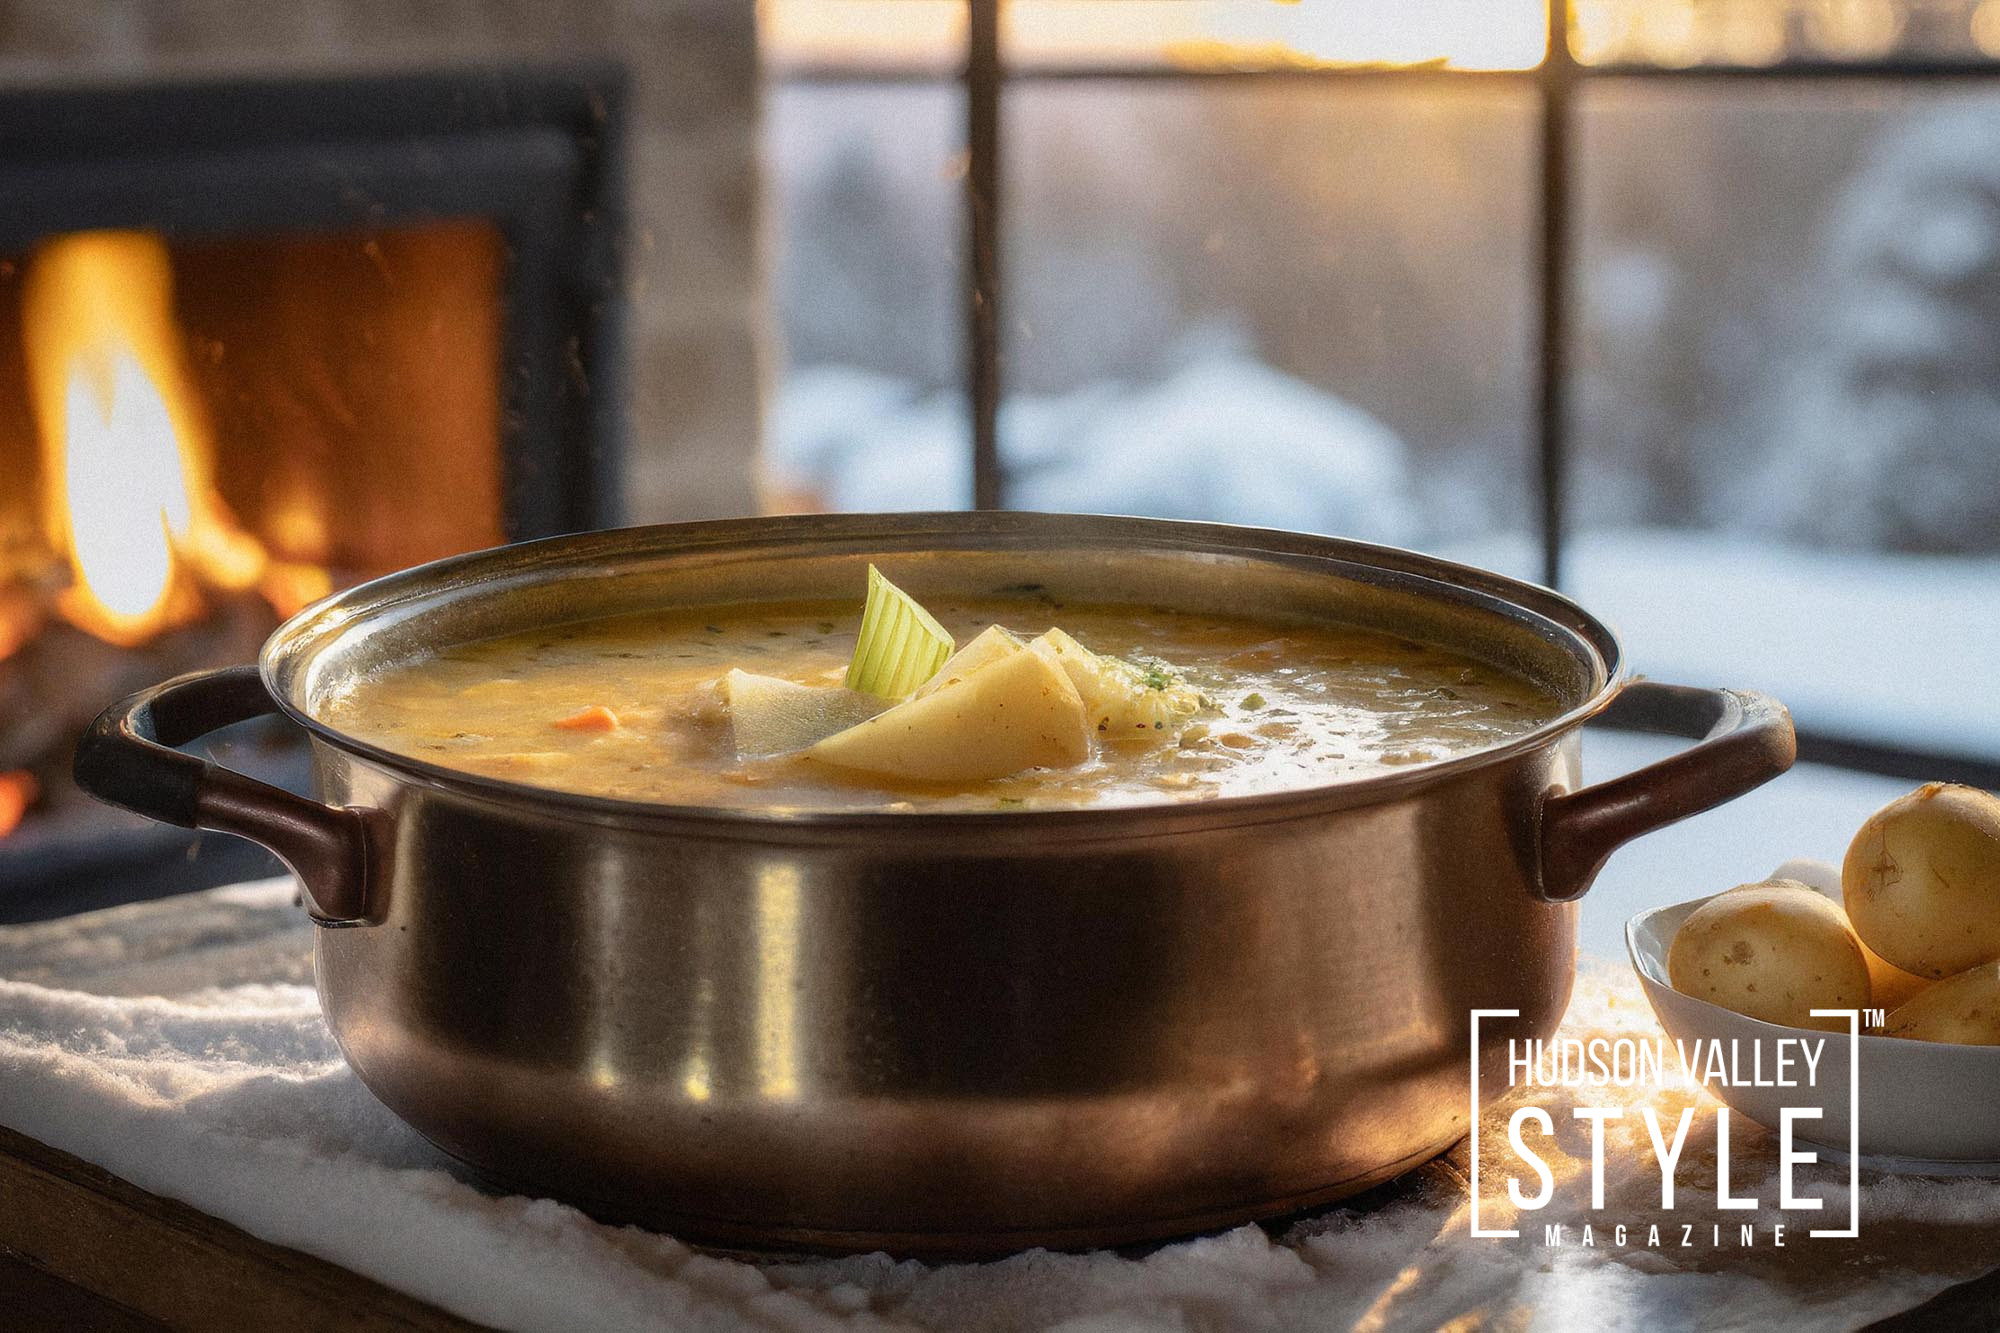 Winter Comforts: A Cozy Culinary Journey in Hudson Valley – Rustic Potato Leek Soup Recipe – Hudson Valley Style Cooking with Maxwell Alexander – Presented by Alluvion Vacations